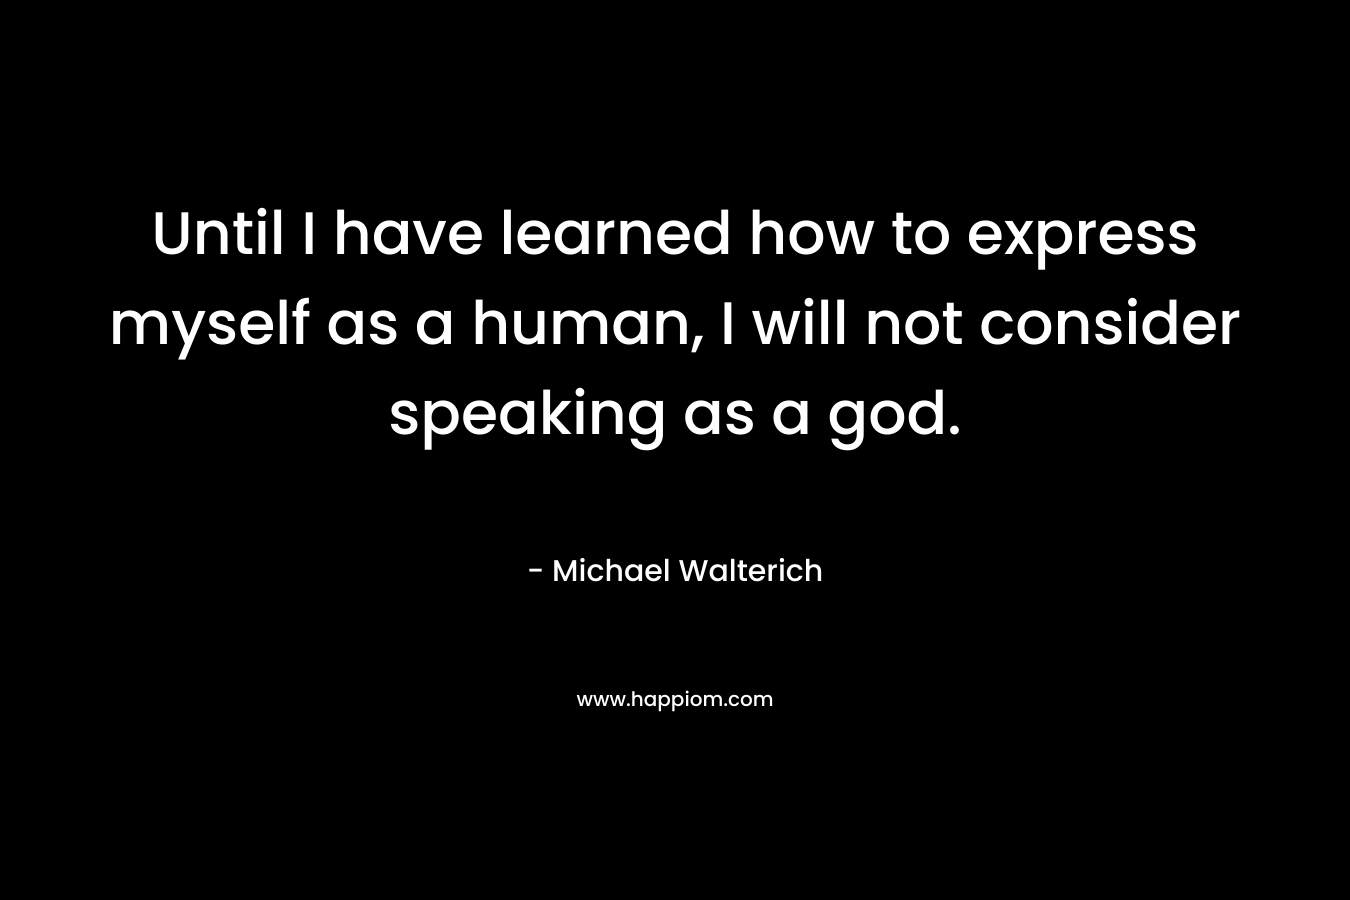 Until I have learned how to express myself as a human, I will not consider speaking as a god.